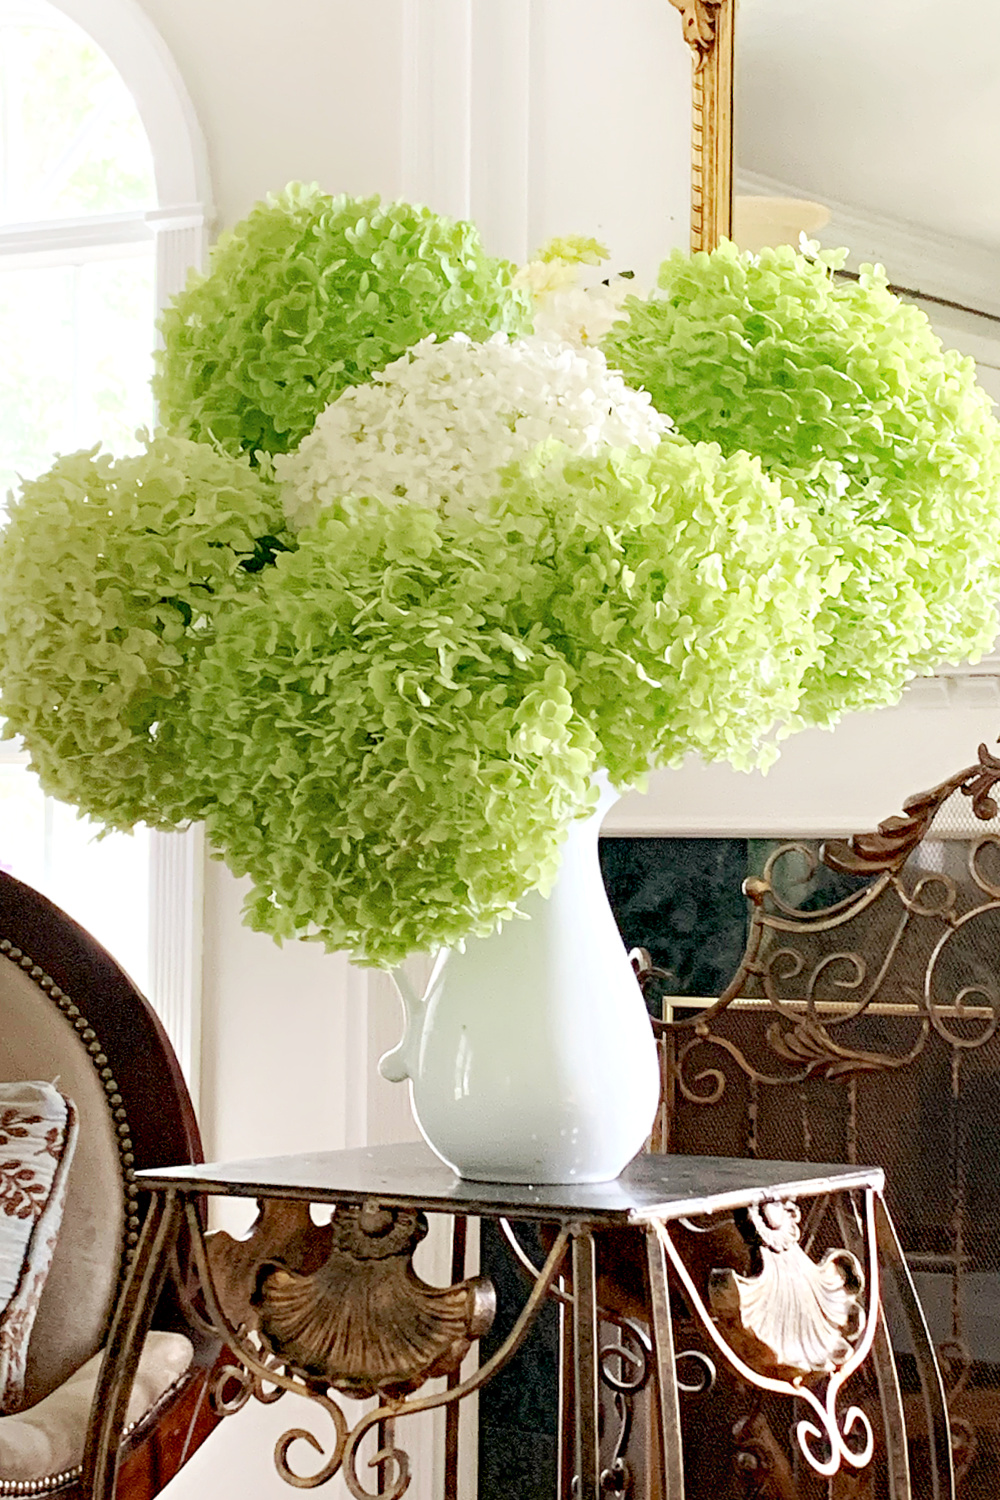 Giant white chartreuse green snowball hydrangea flowers broken after the rain storm